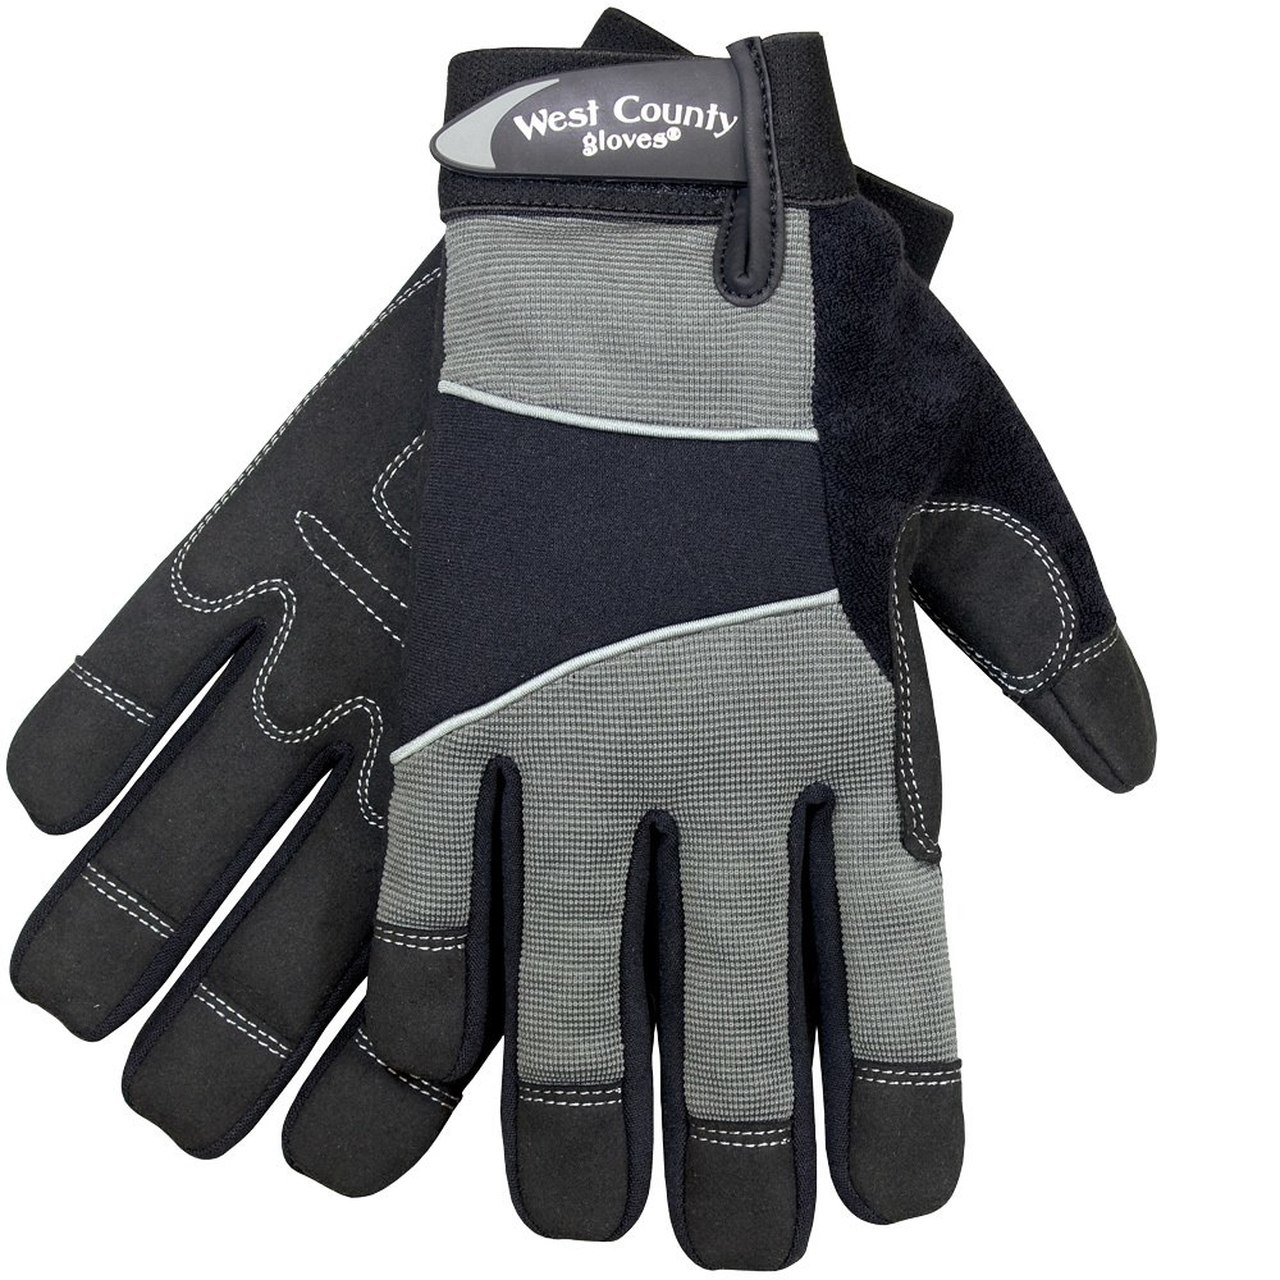 West County gloves 013C/M Work Gloves, Men's, M, Adjustable Cuff, Polyester/Spandex/Synthetic Suede, Black/Charcoal - 1